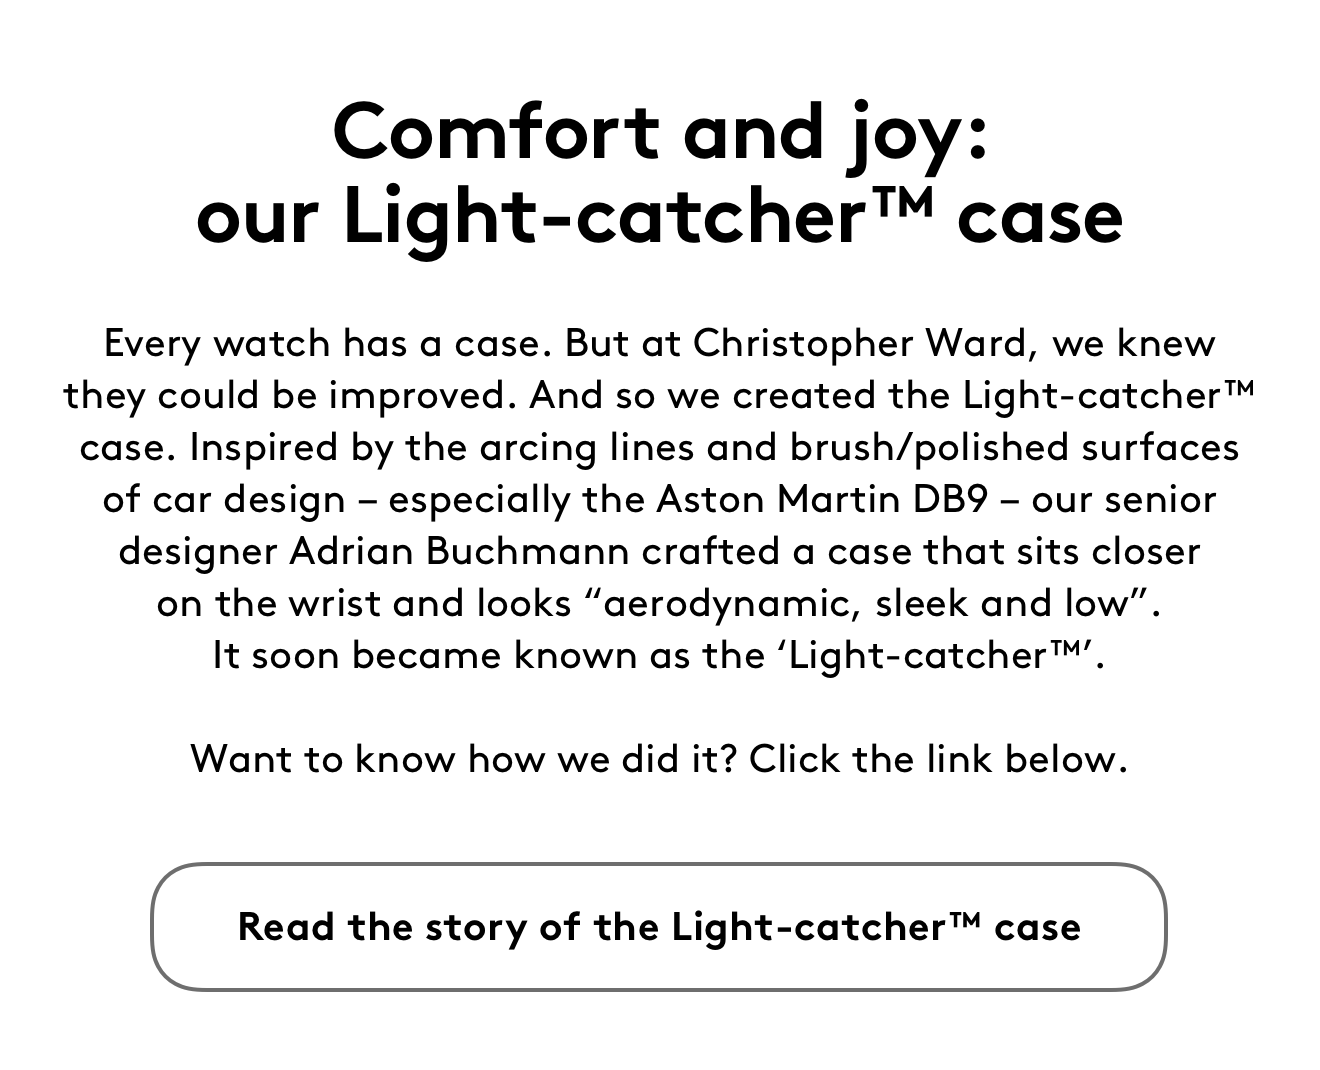 Read the story of the Light-catcher™ case